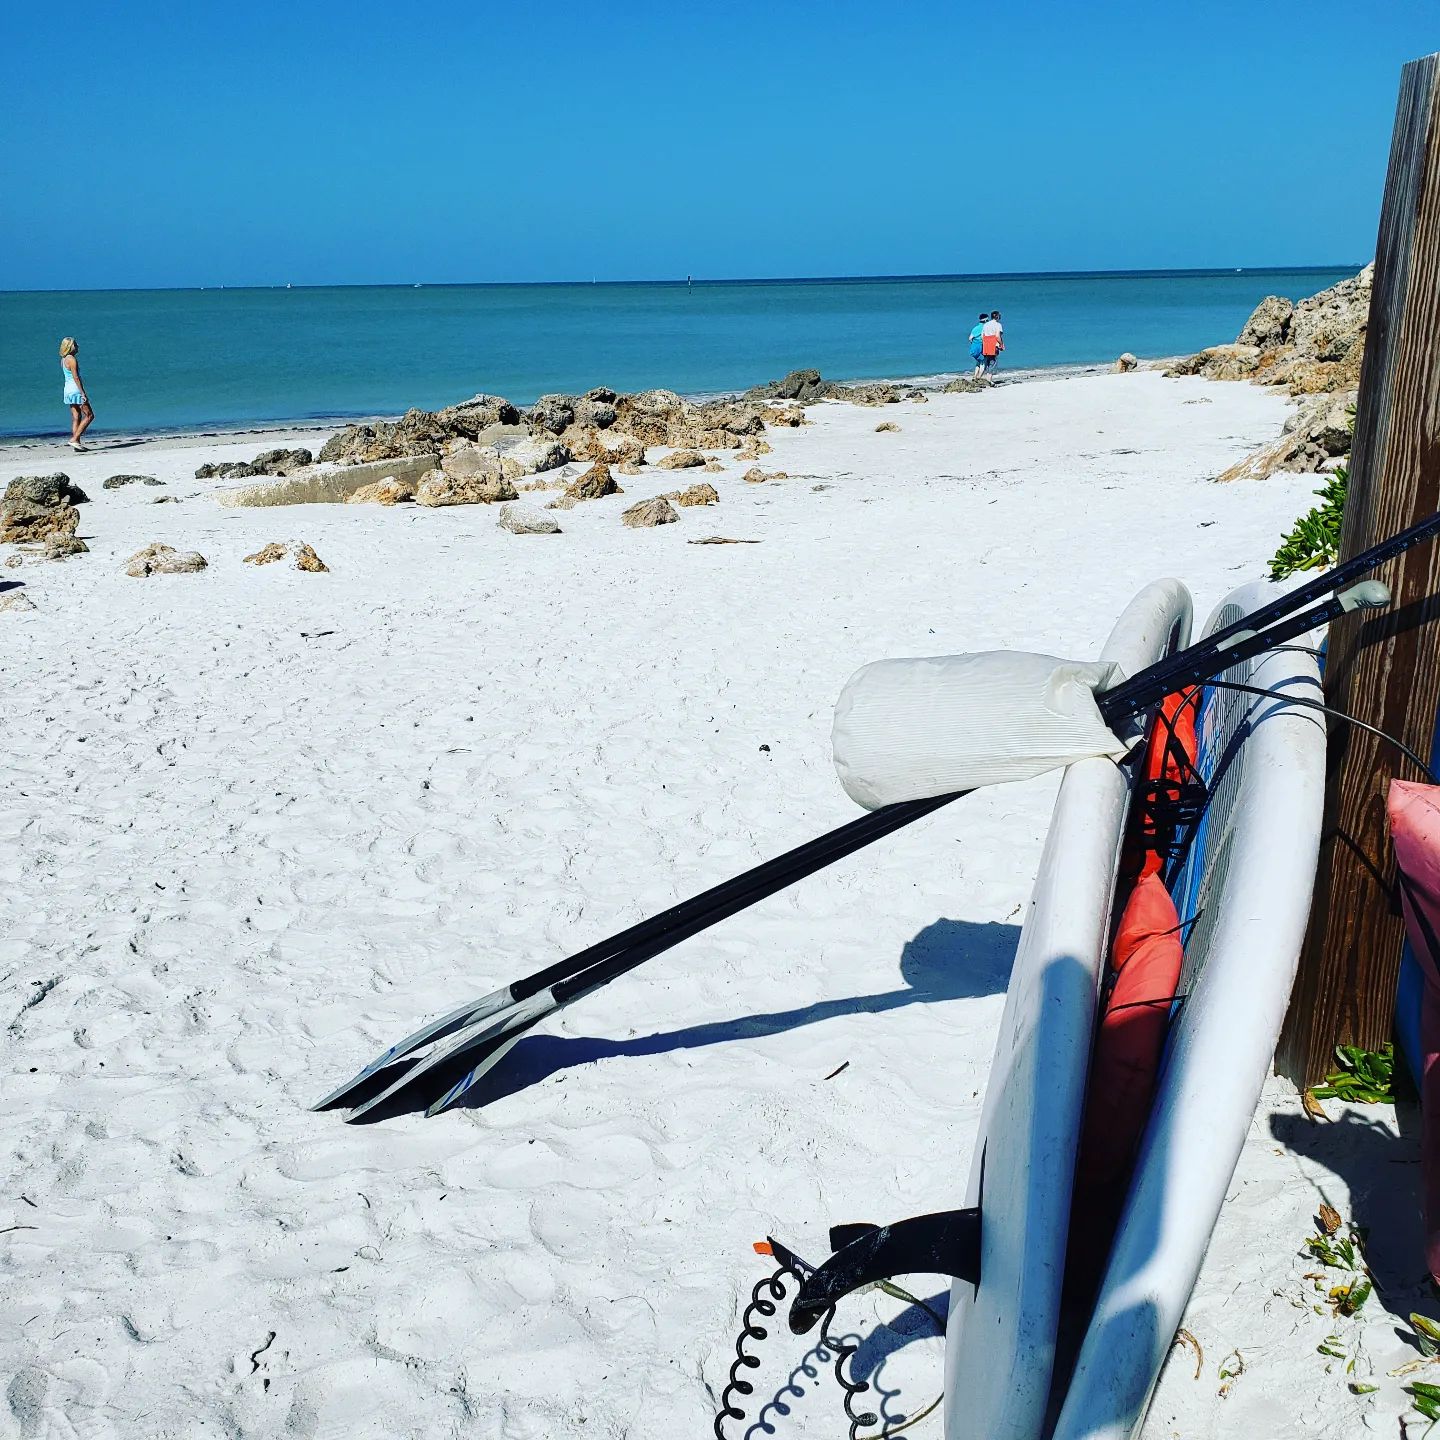 It's a beautiful day out on the beach! @siestakeypaddleboards